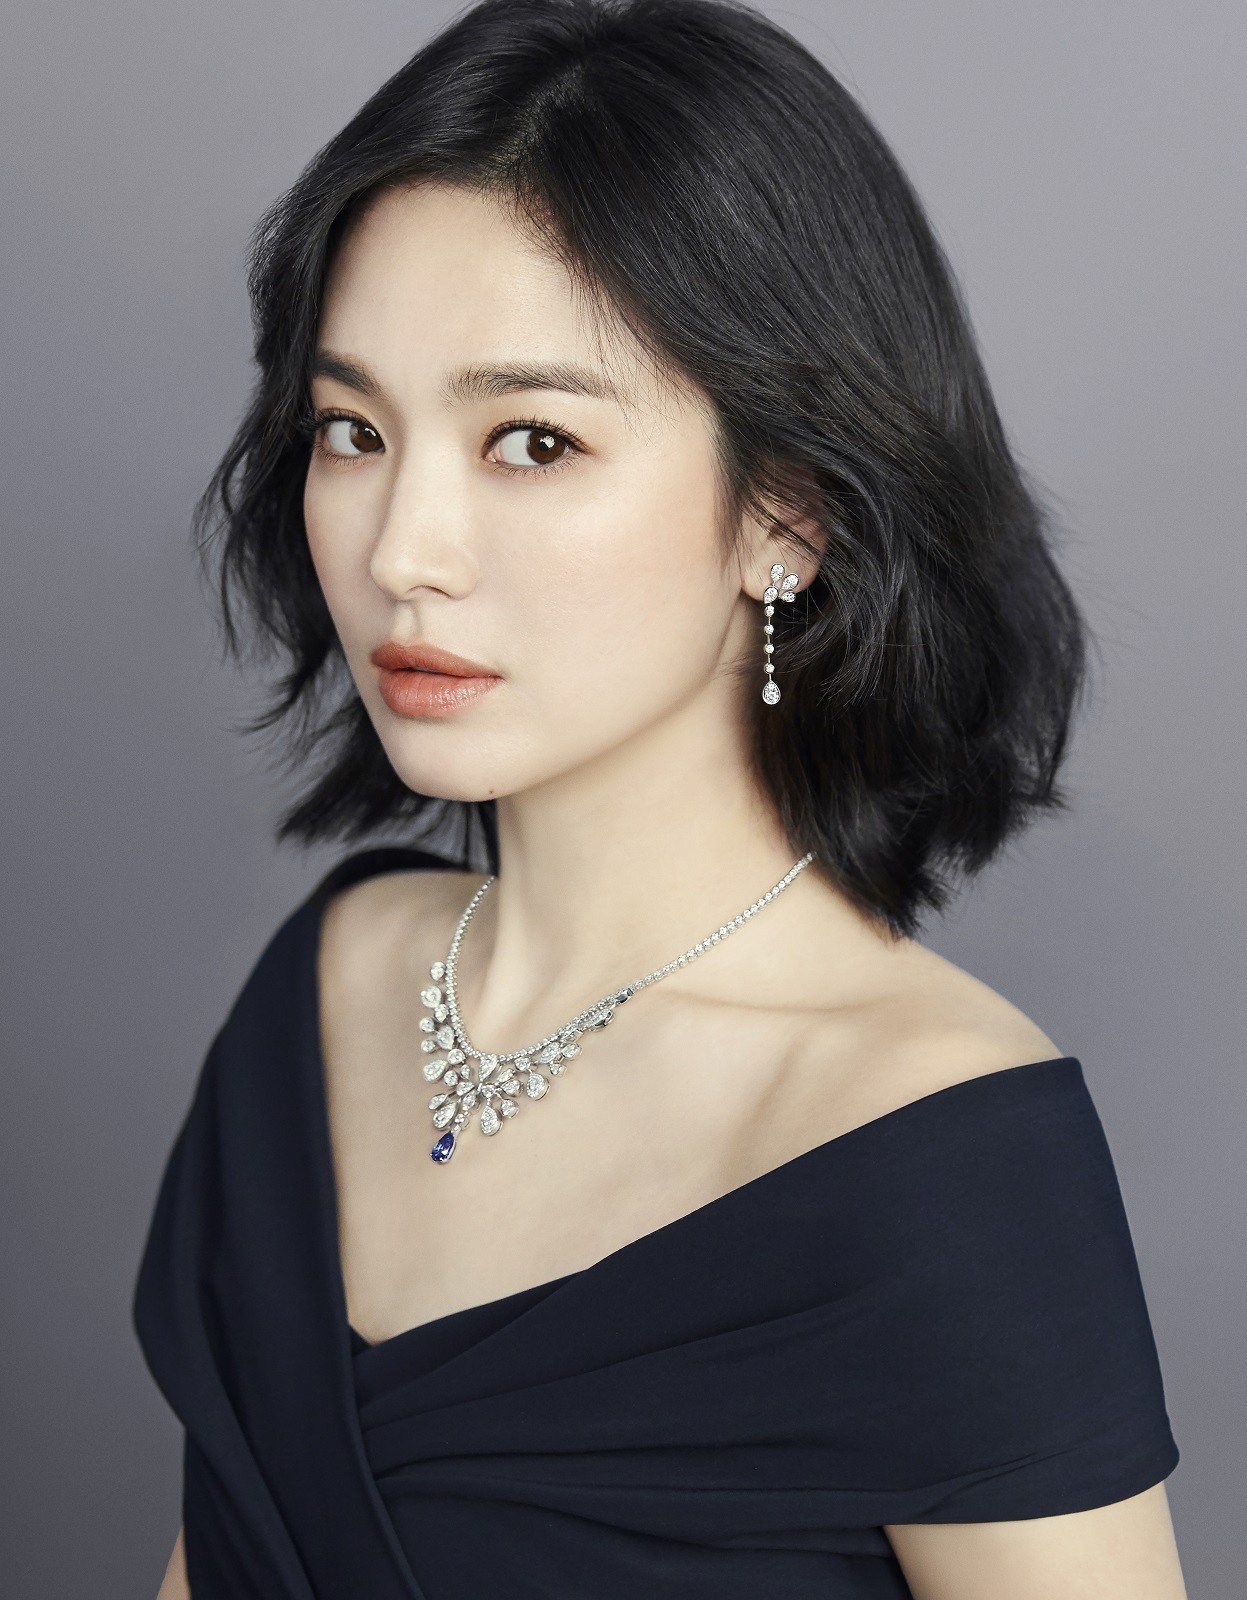 Here is a first look at Song Hye-kyo's campaign for Chaumet, wearing  US$180,000 necklace